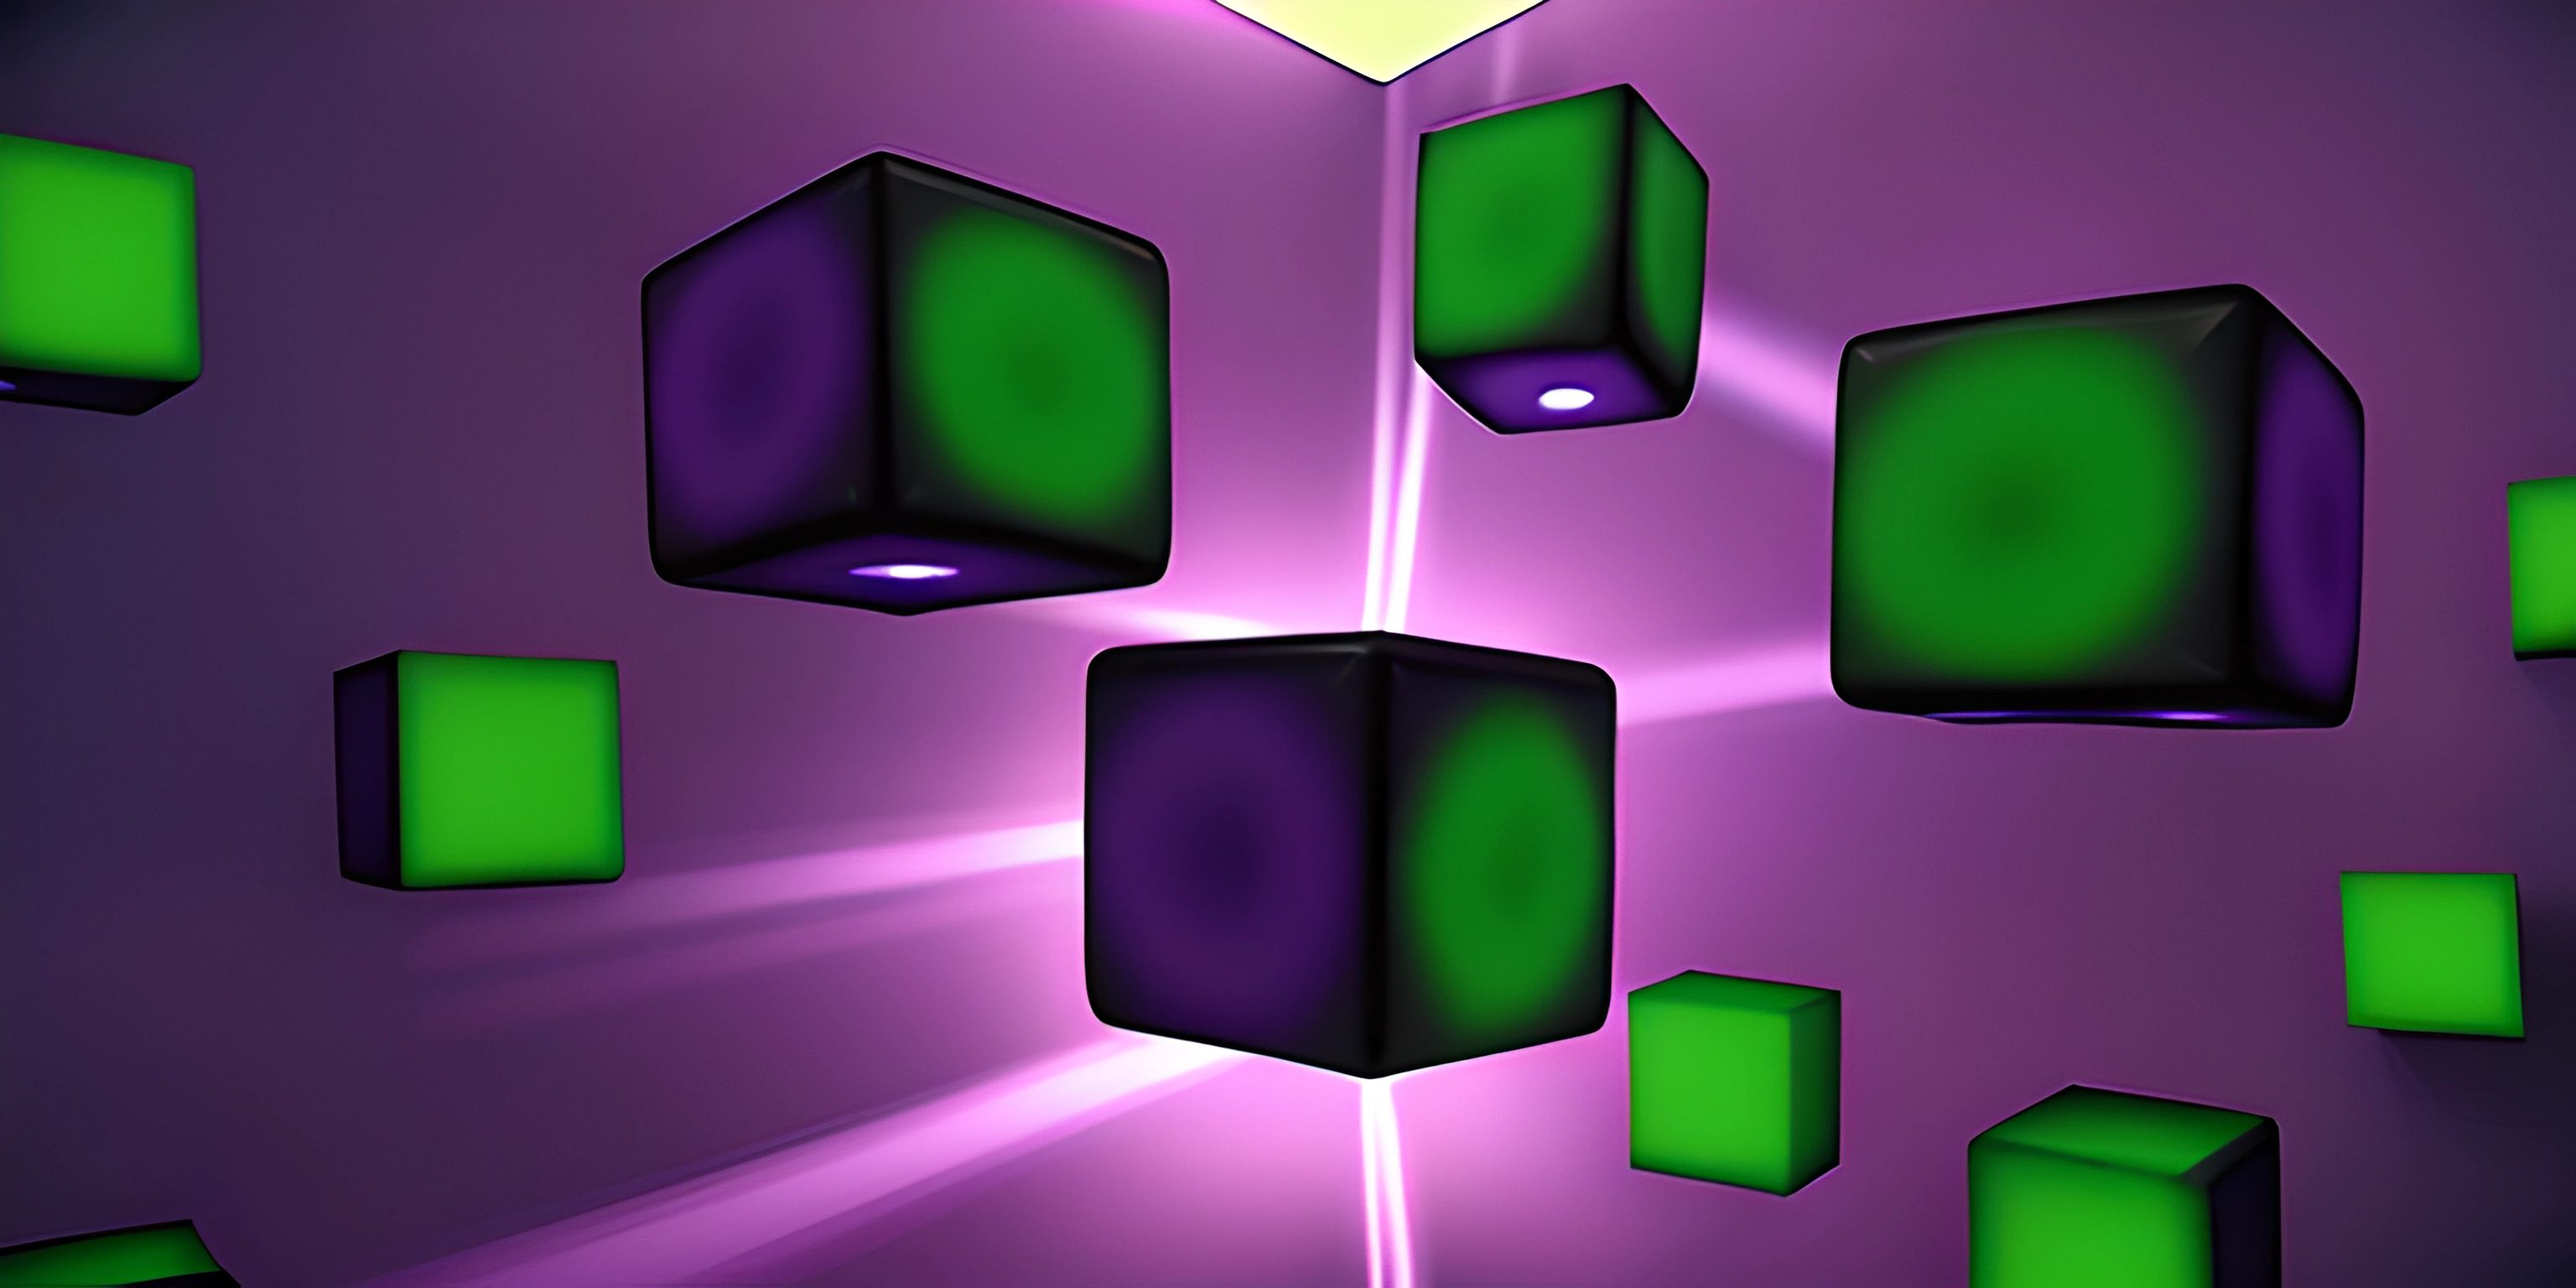 the many green and purple cubes are shown against a blue background with white light